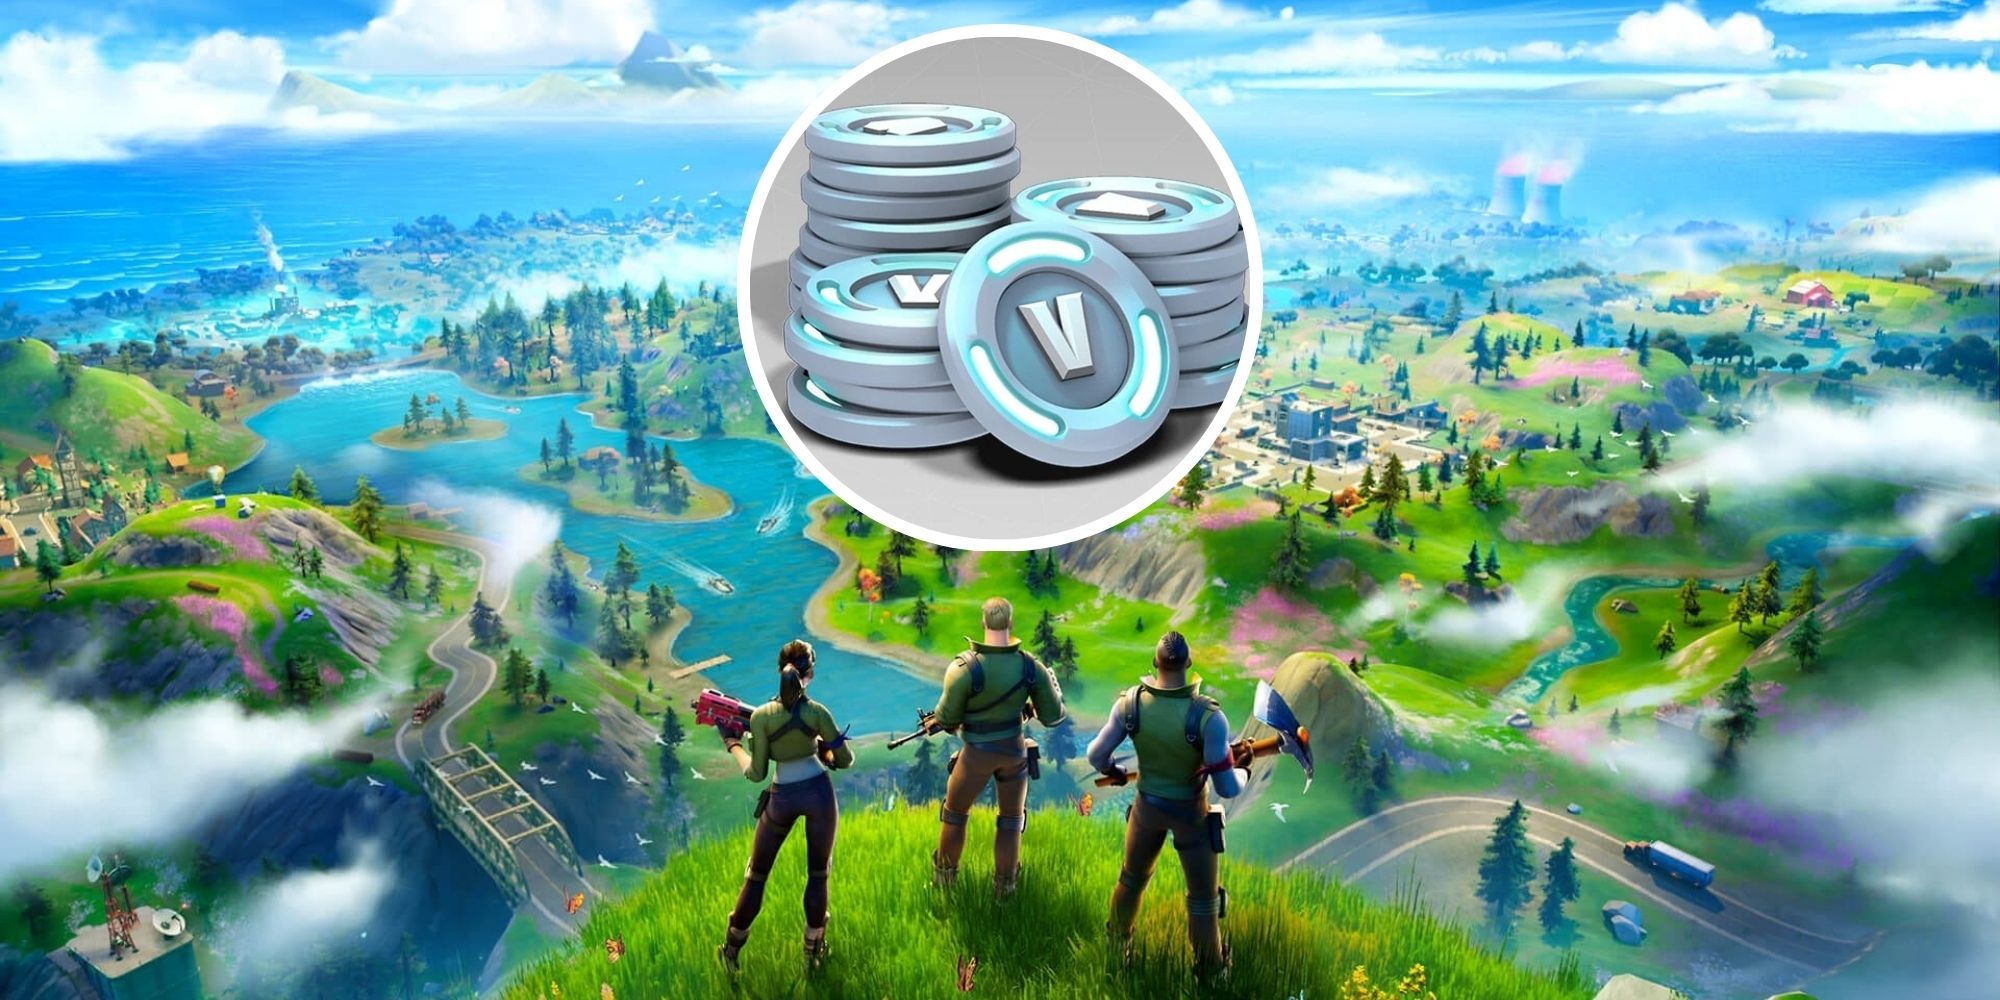 Fortnite Players Exploited A Glitch To Obtain Free Skins, Now They’re In V-Bucks Debt